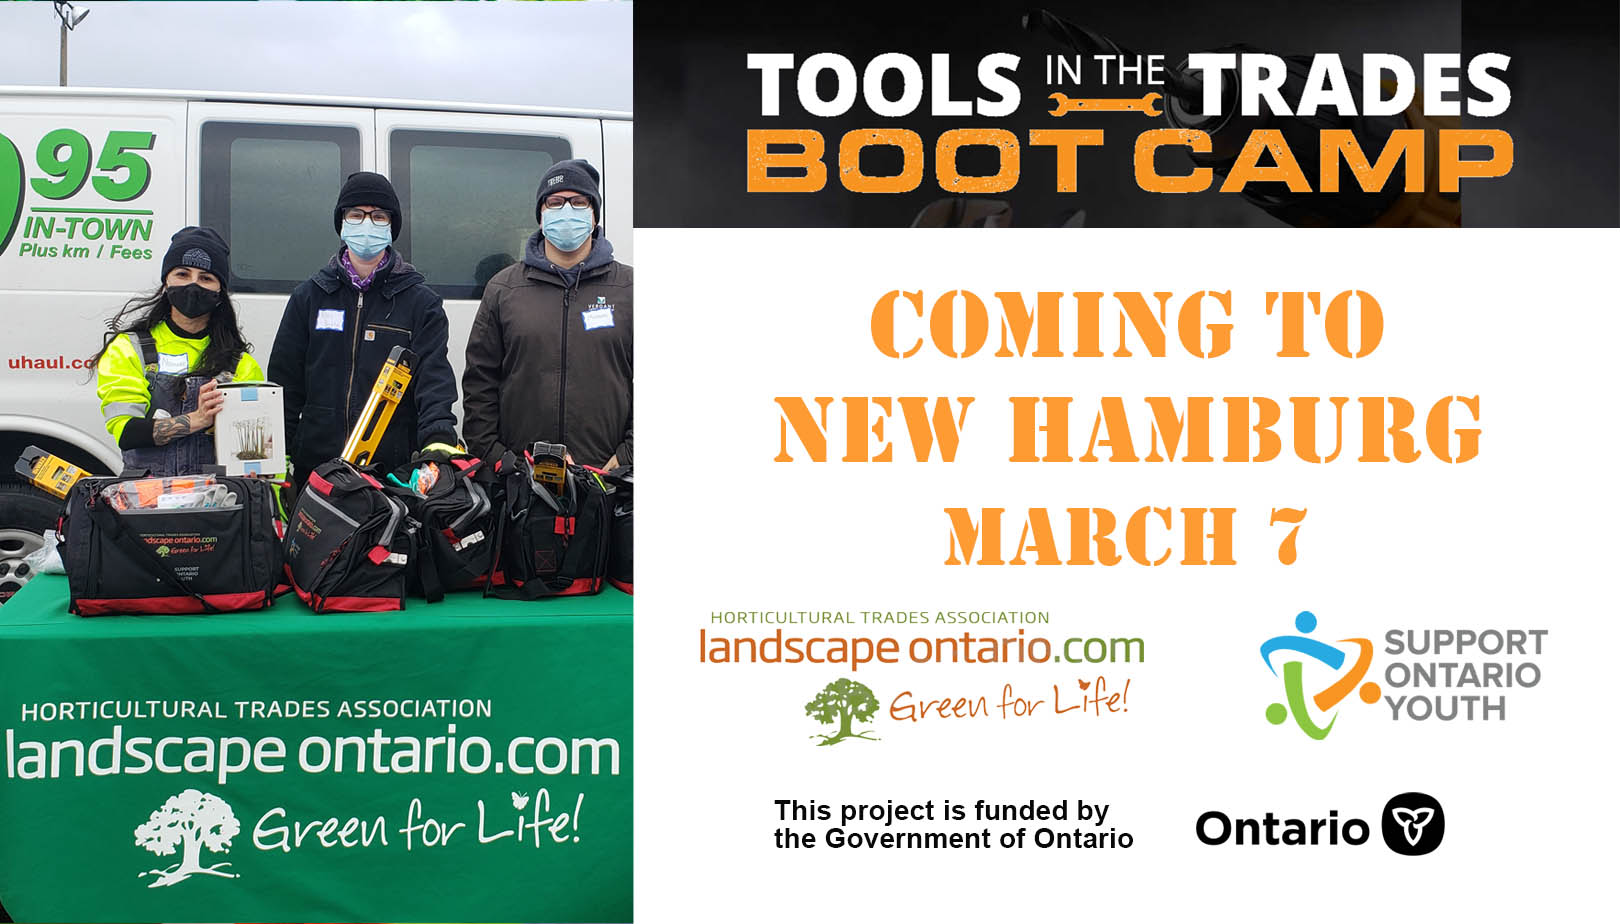 Tools in the Trades Boot Camp March 7